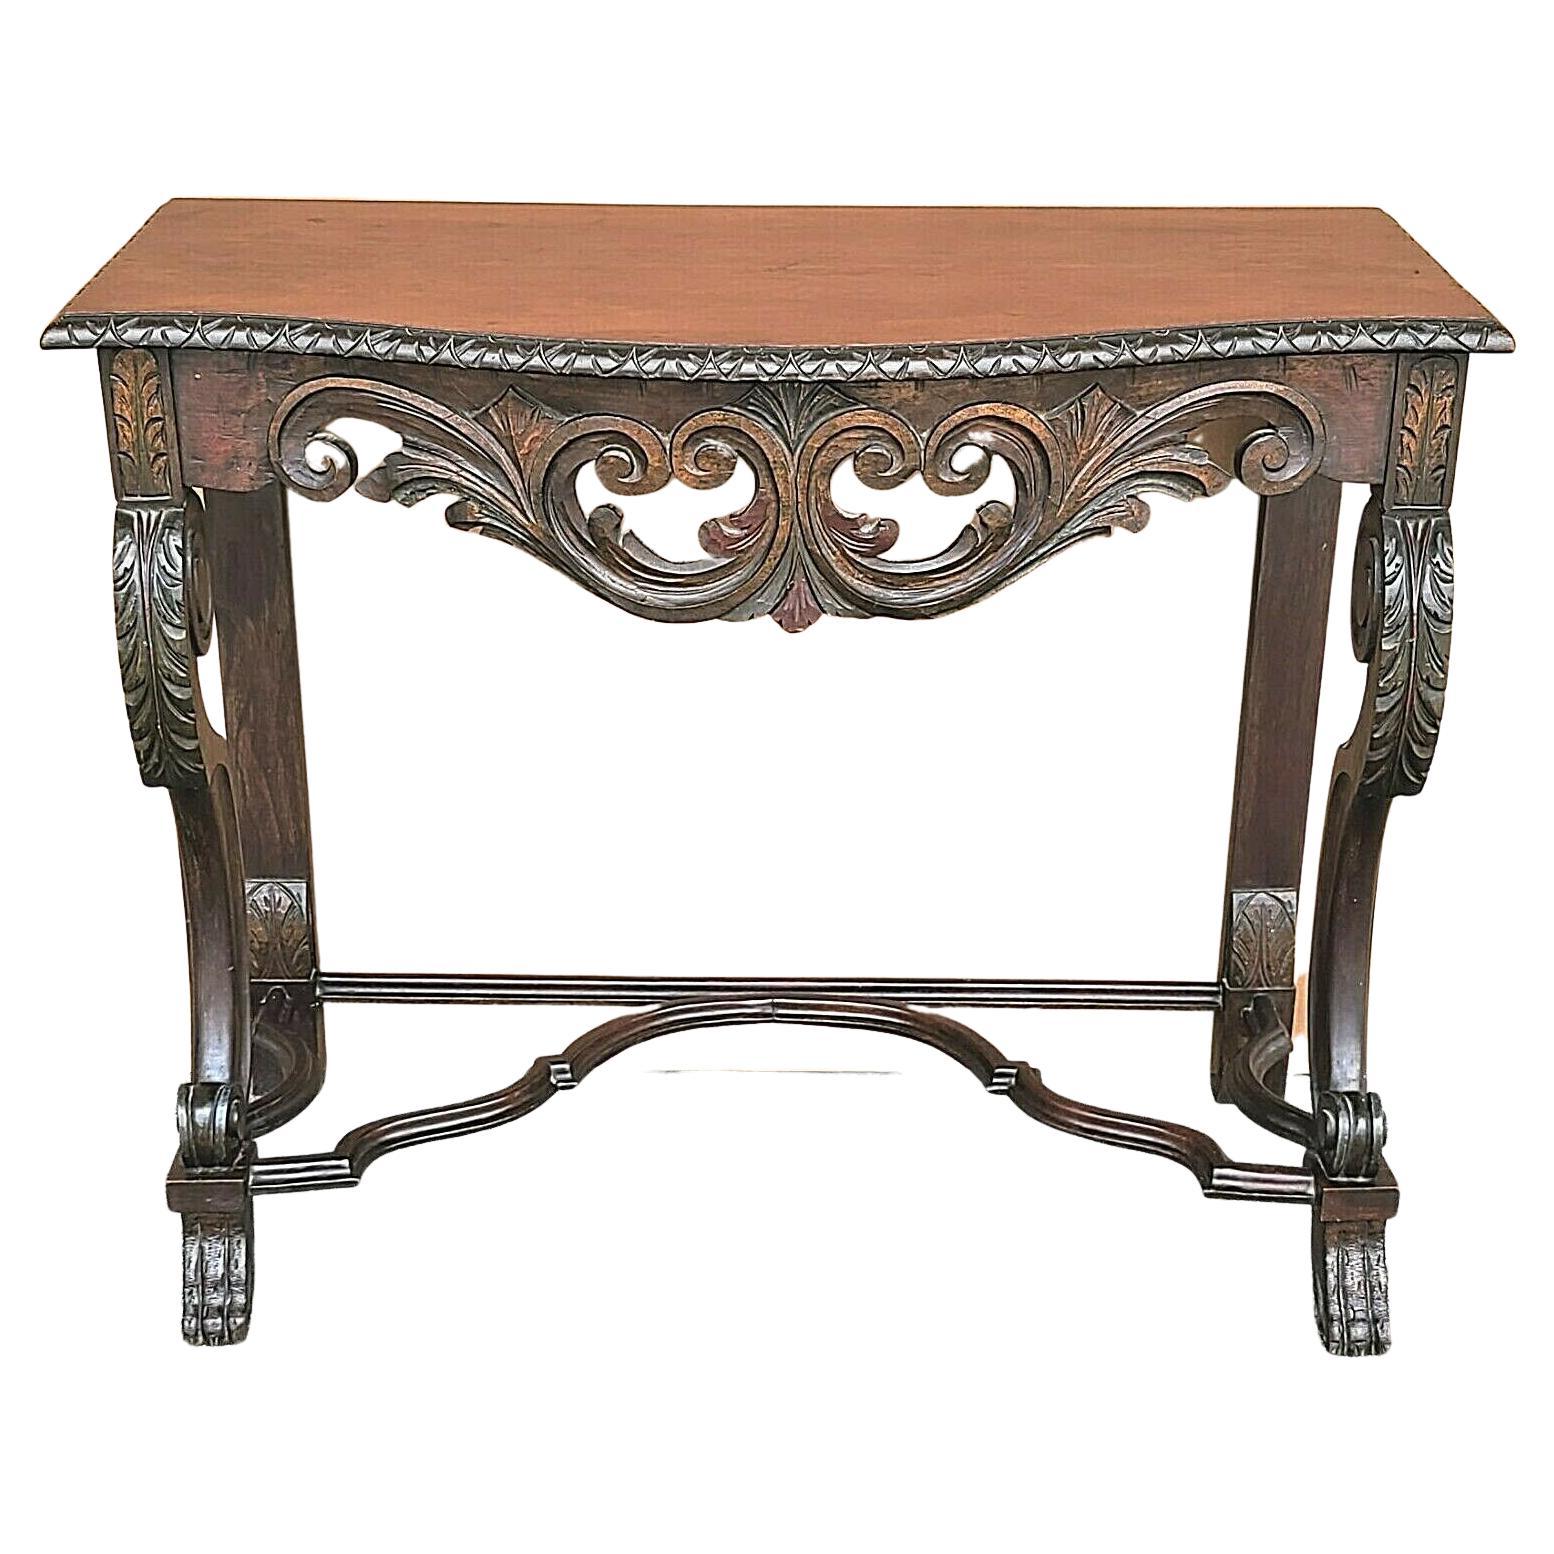 Antique English Regency Console Table Polychrome